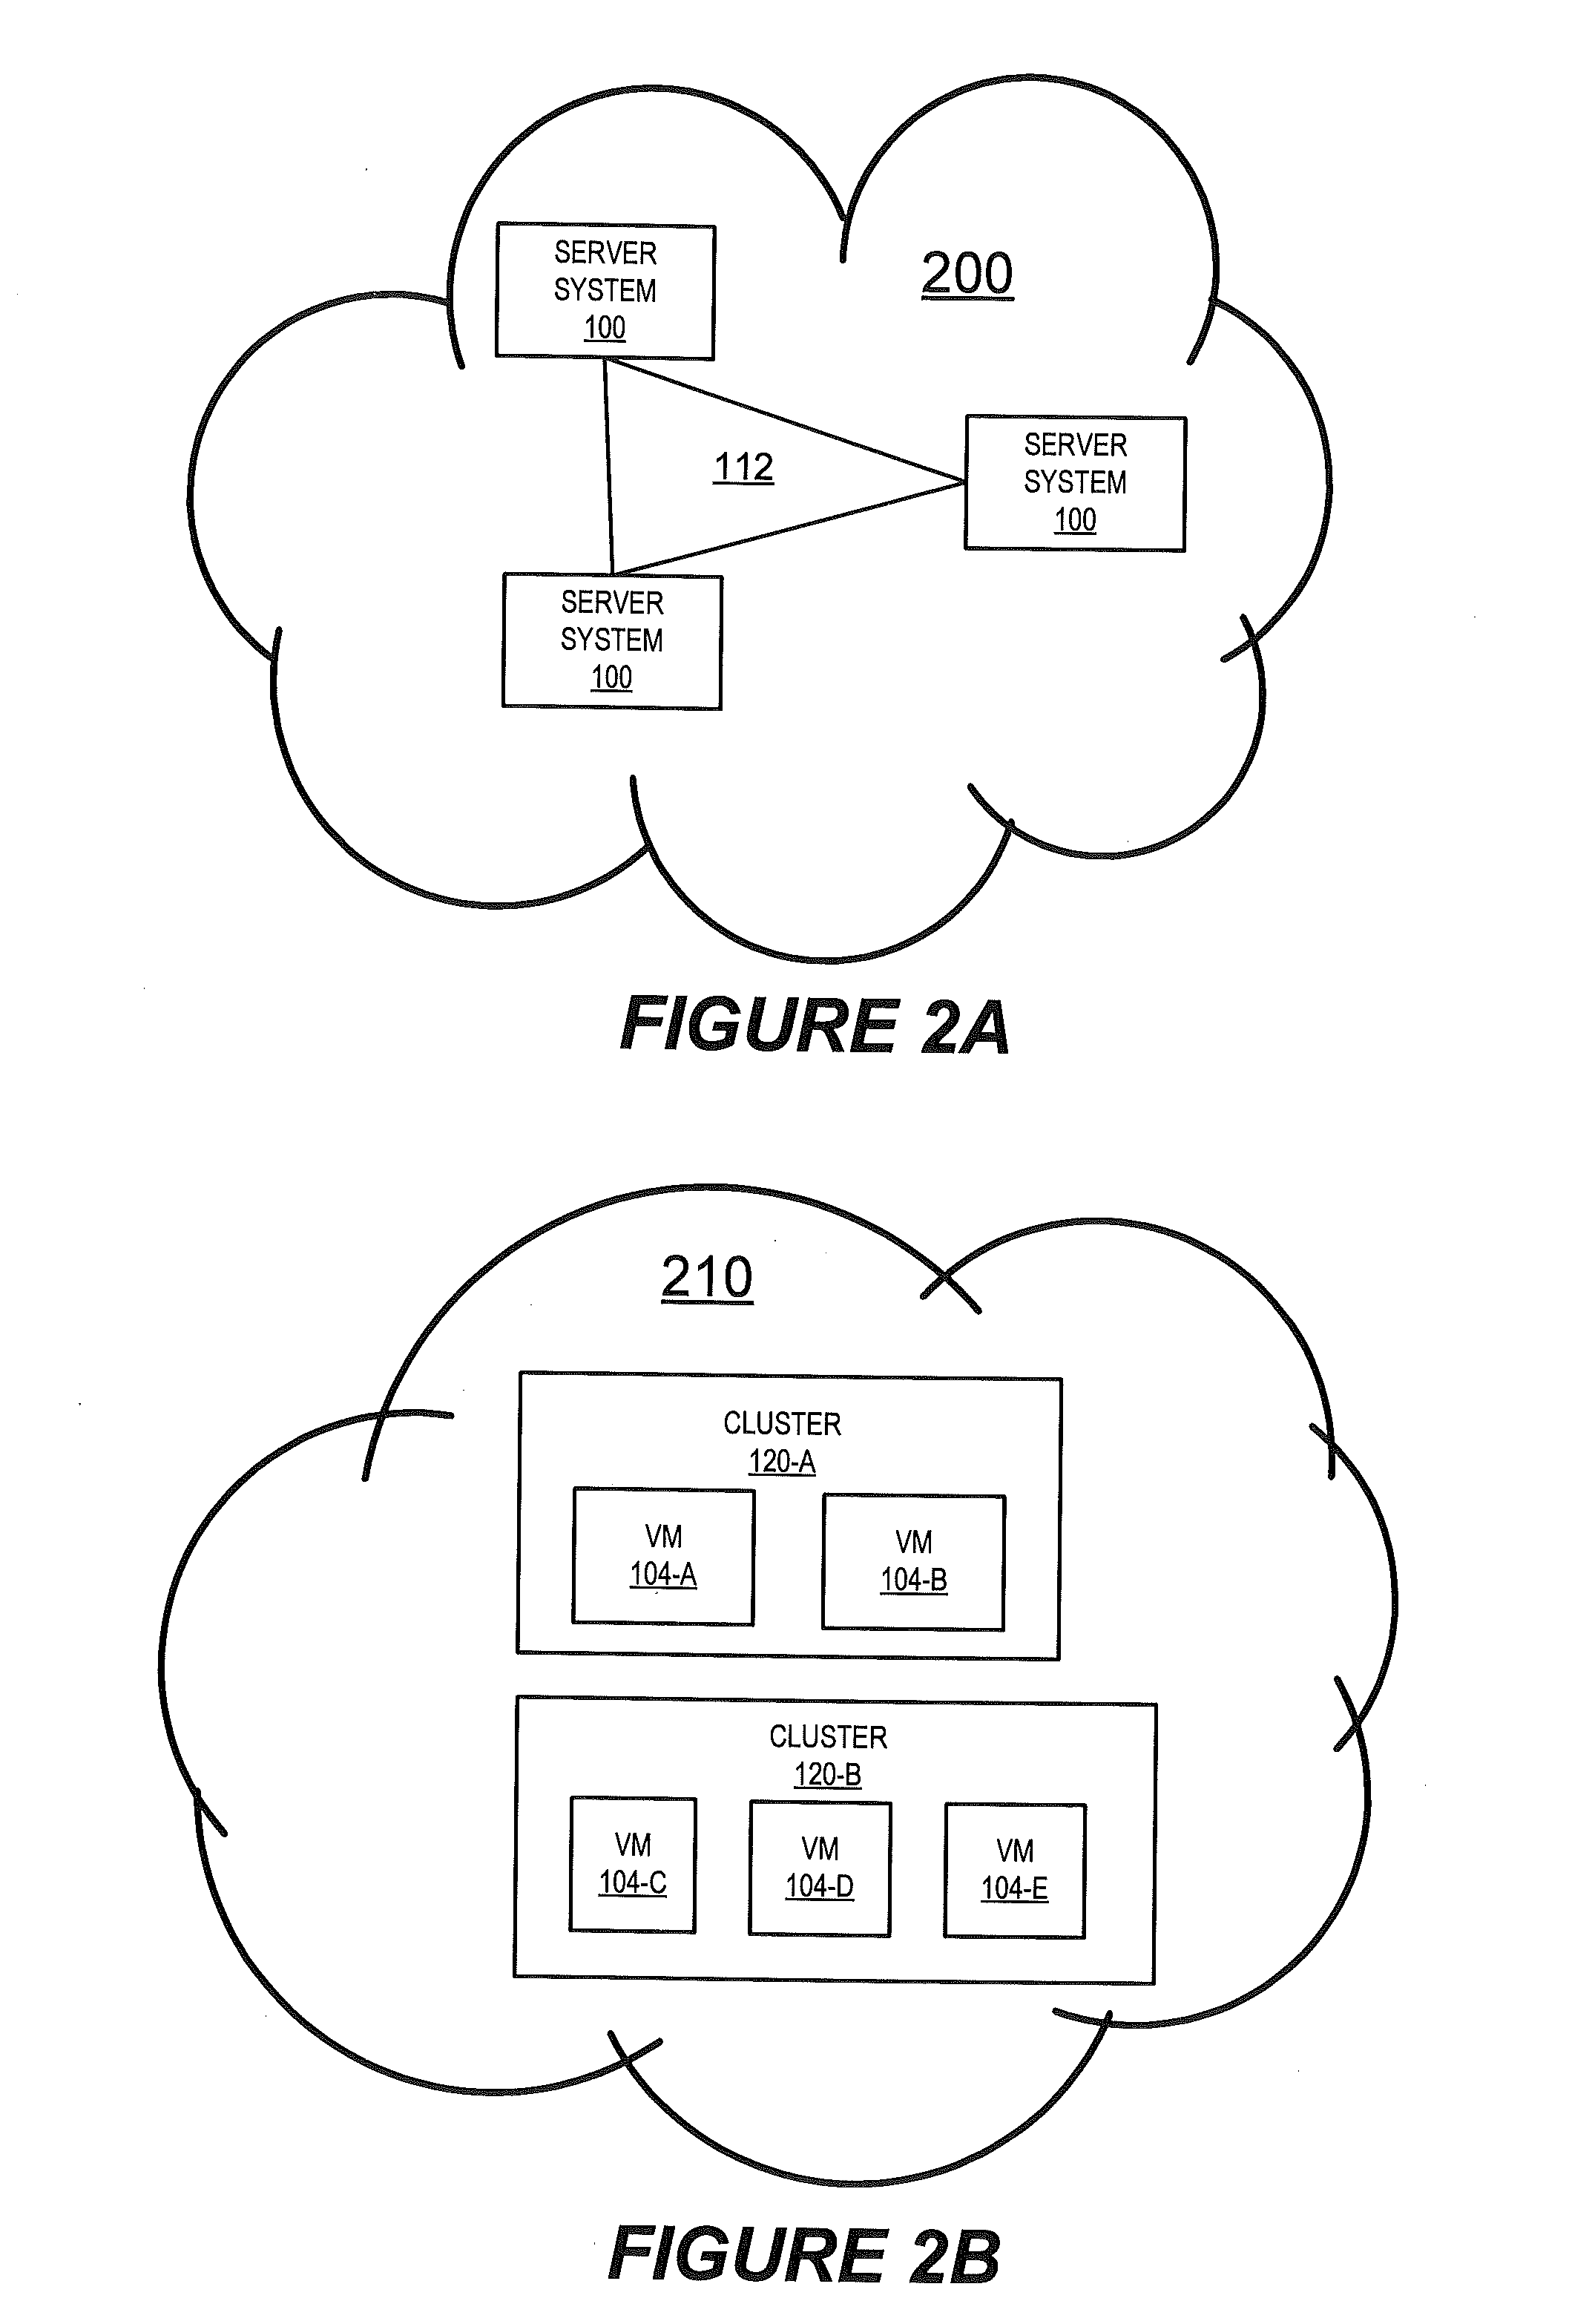 Self-generation of virtual machine security clusters